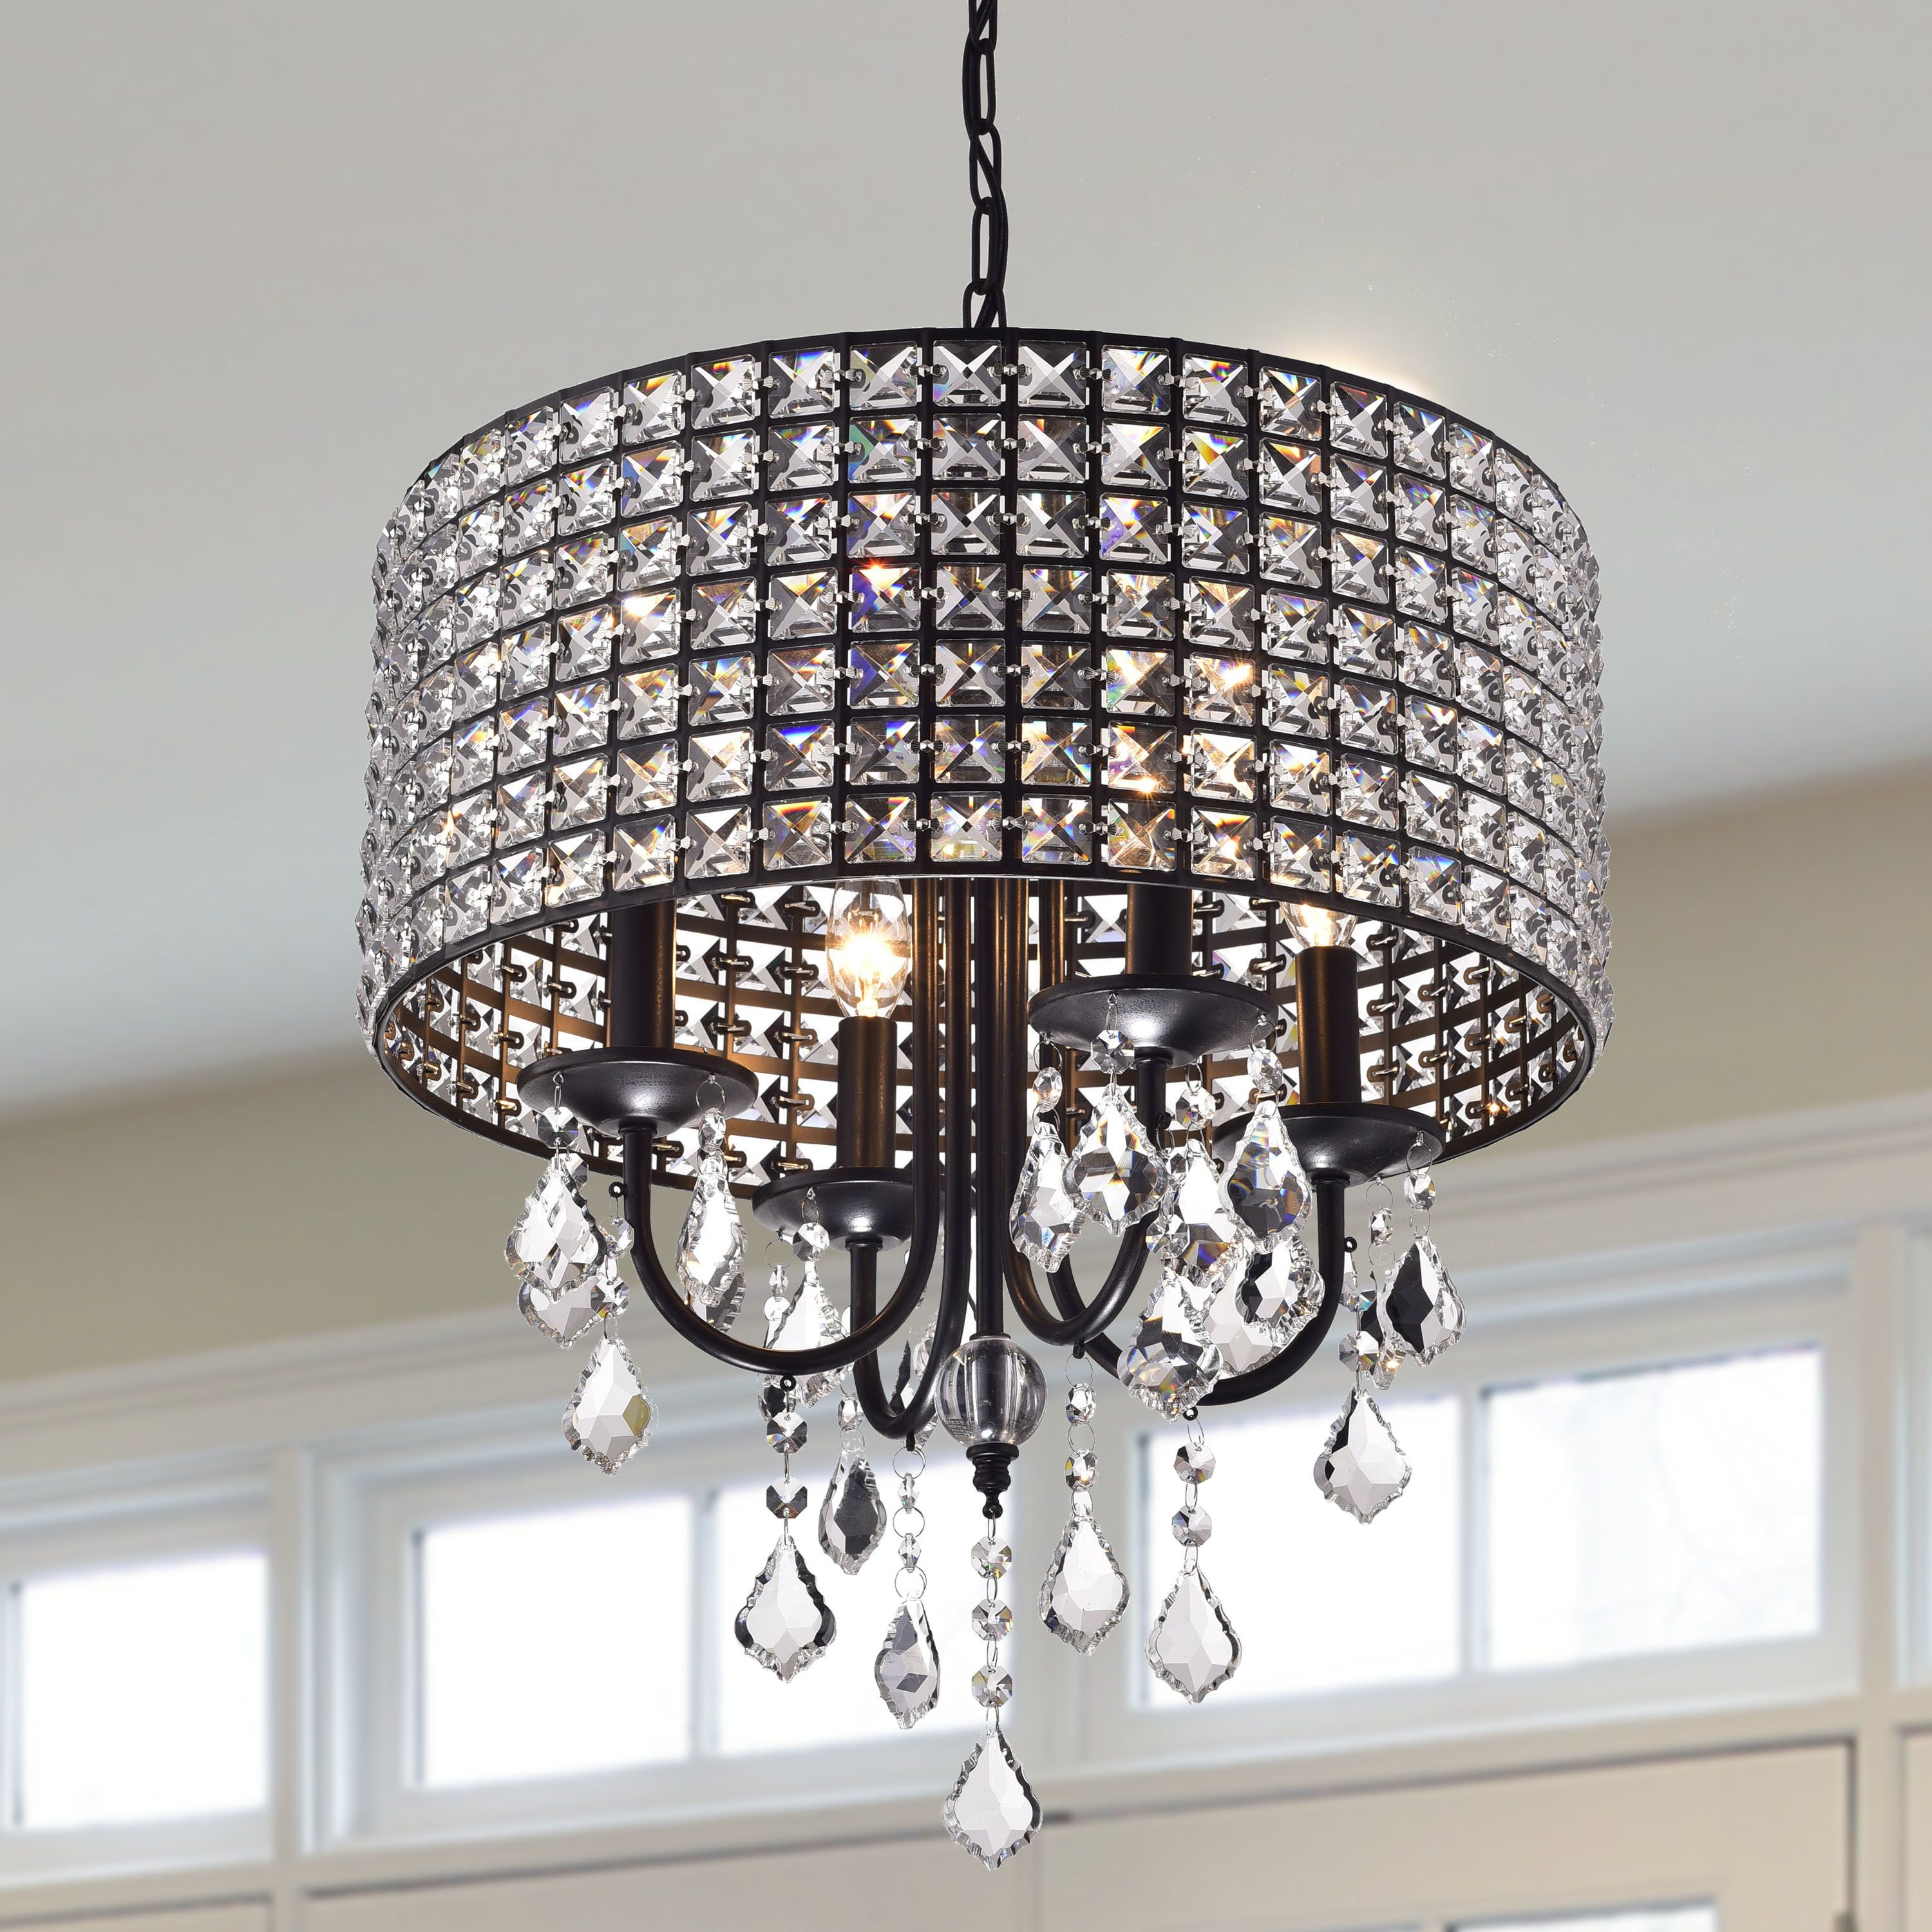 Albano 4 Light Crystal Chandelier Pertaining To Gisselle 4 Light Drum Chandeliers (View 26 of 30)